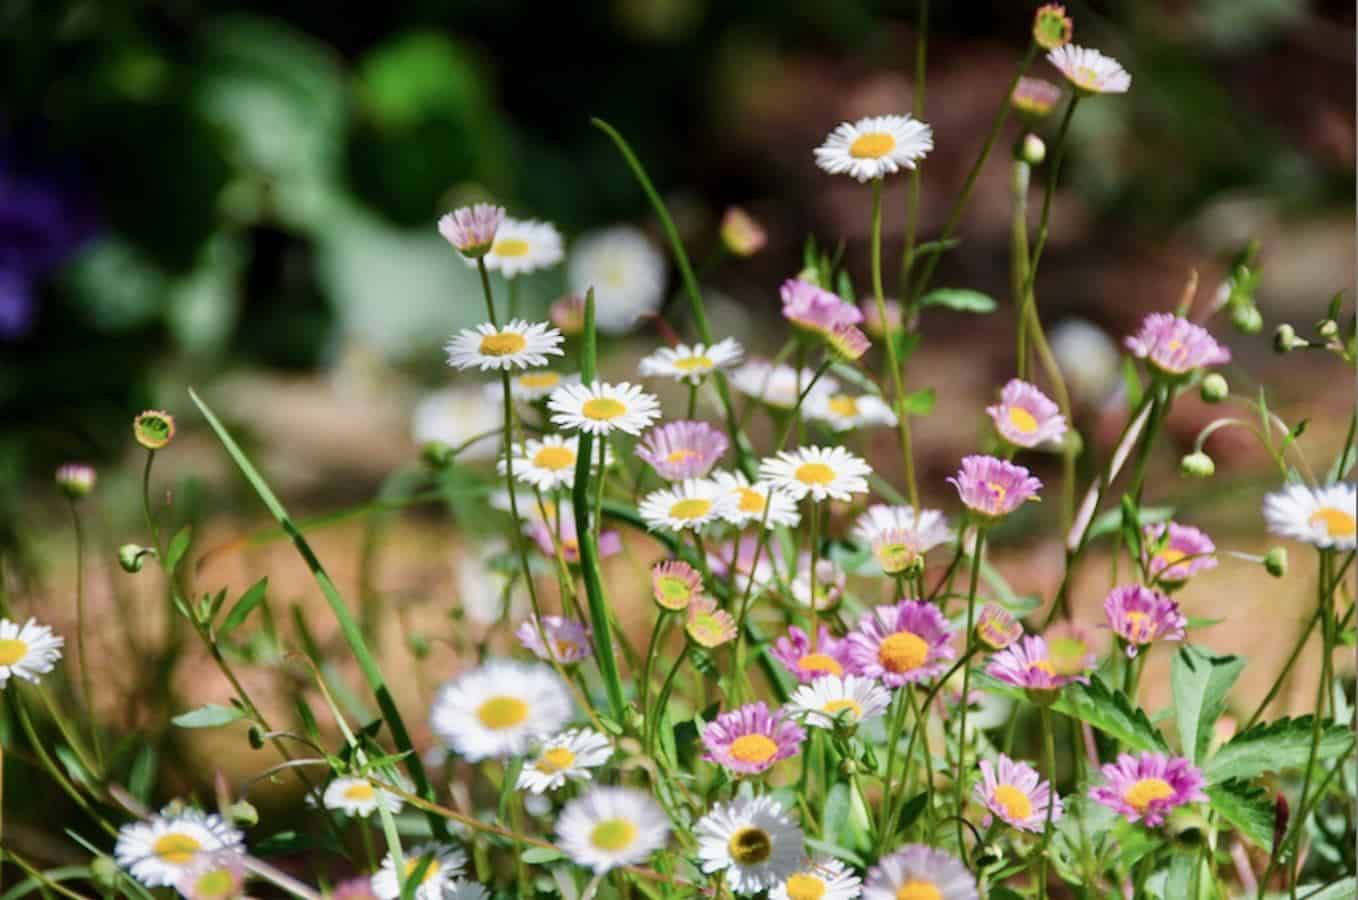 Pink and white daisies with long green stems swaying in a field.